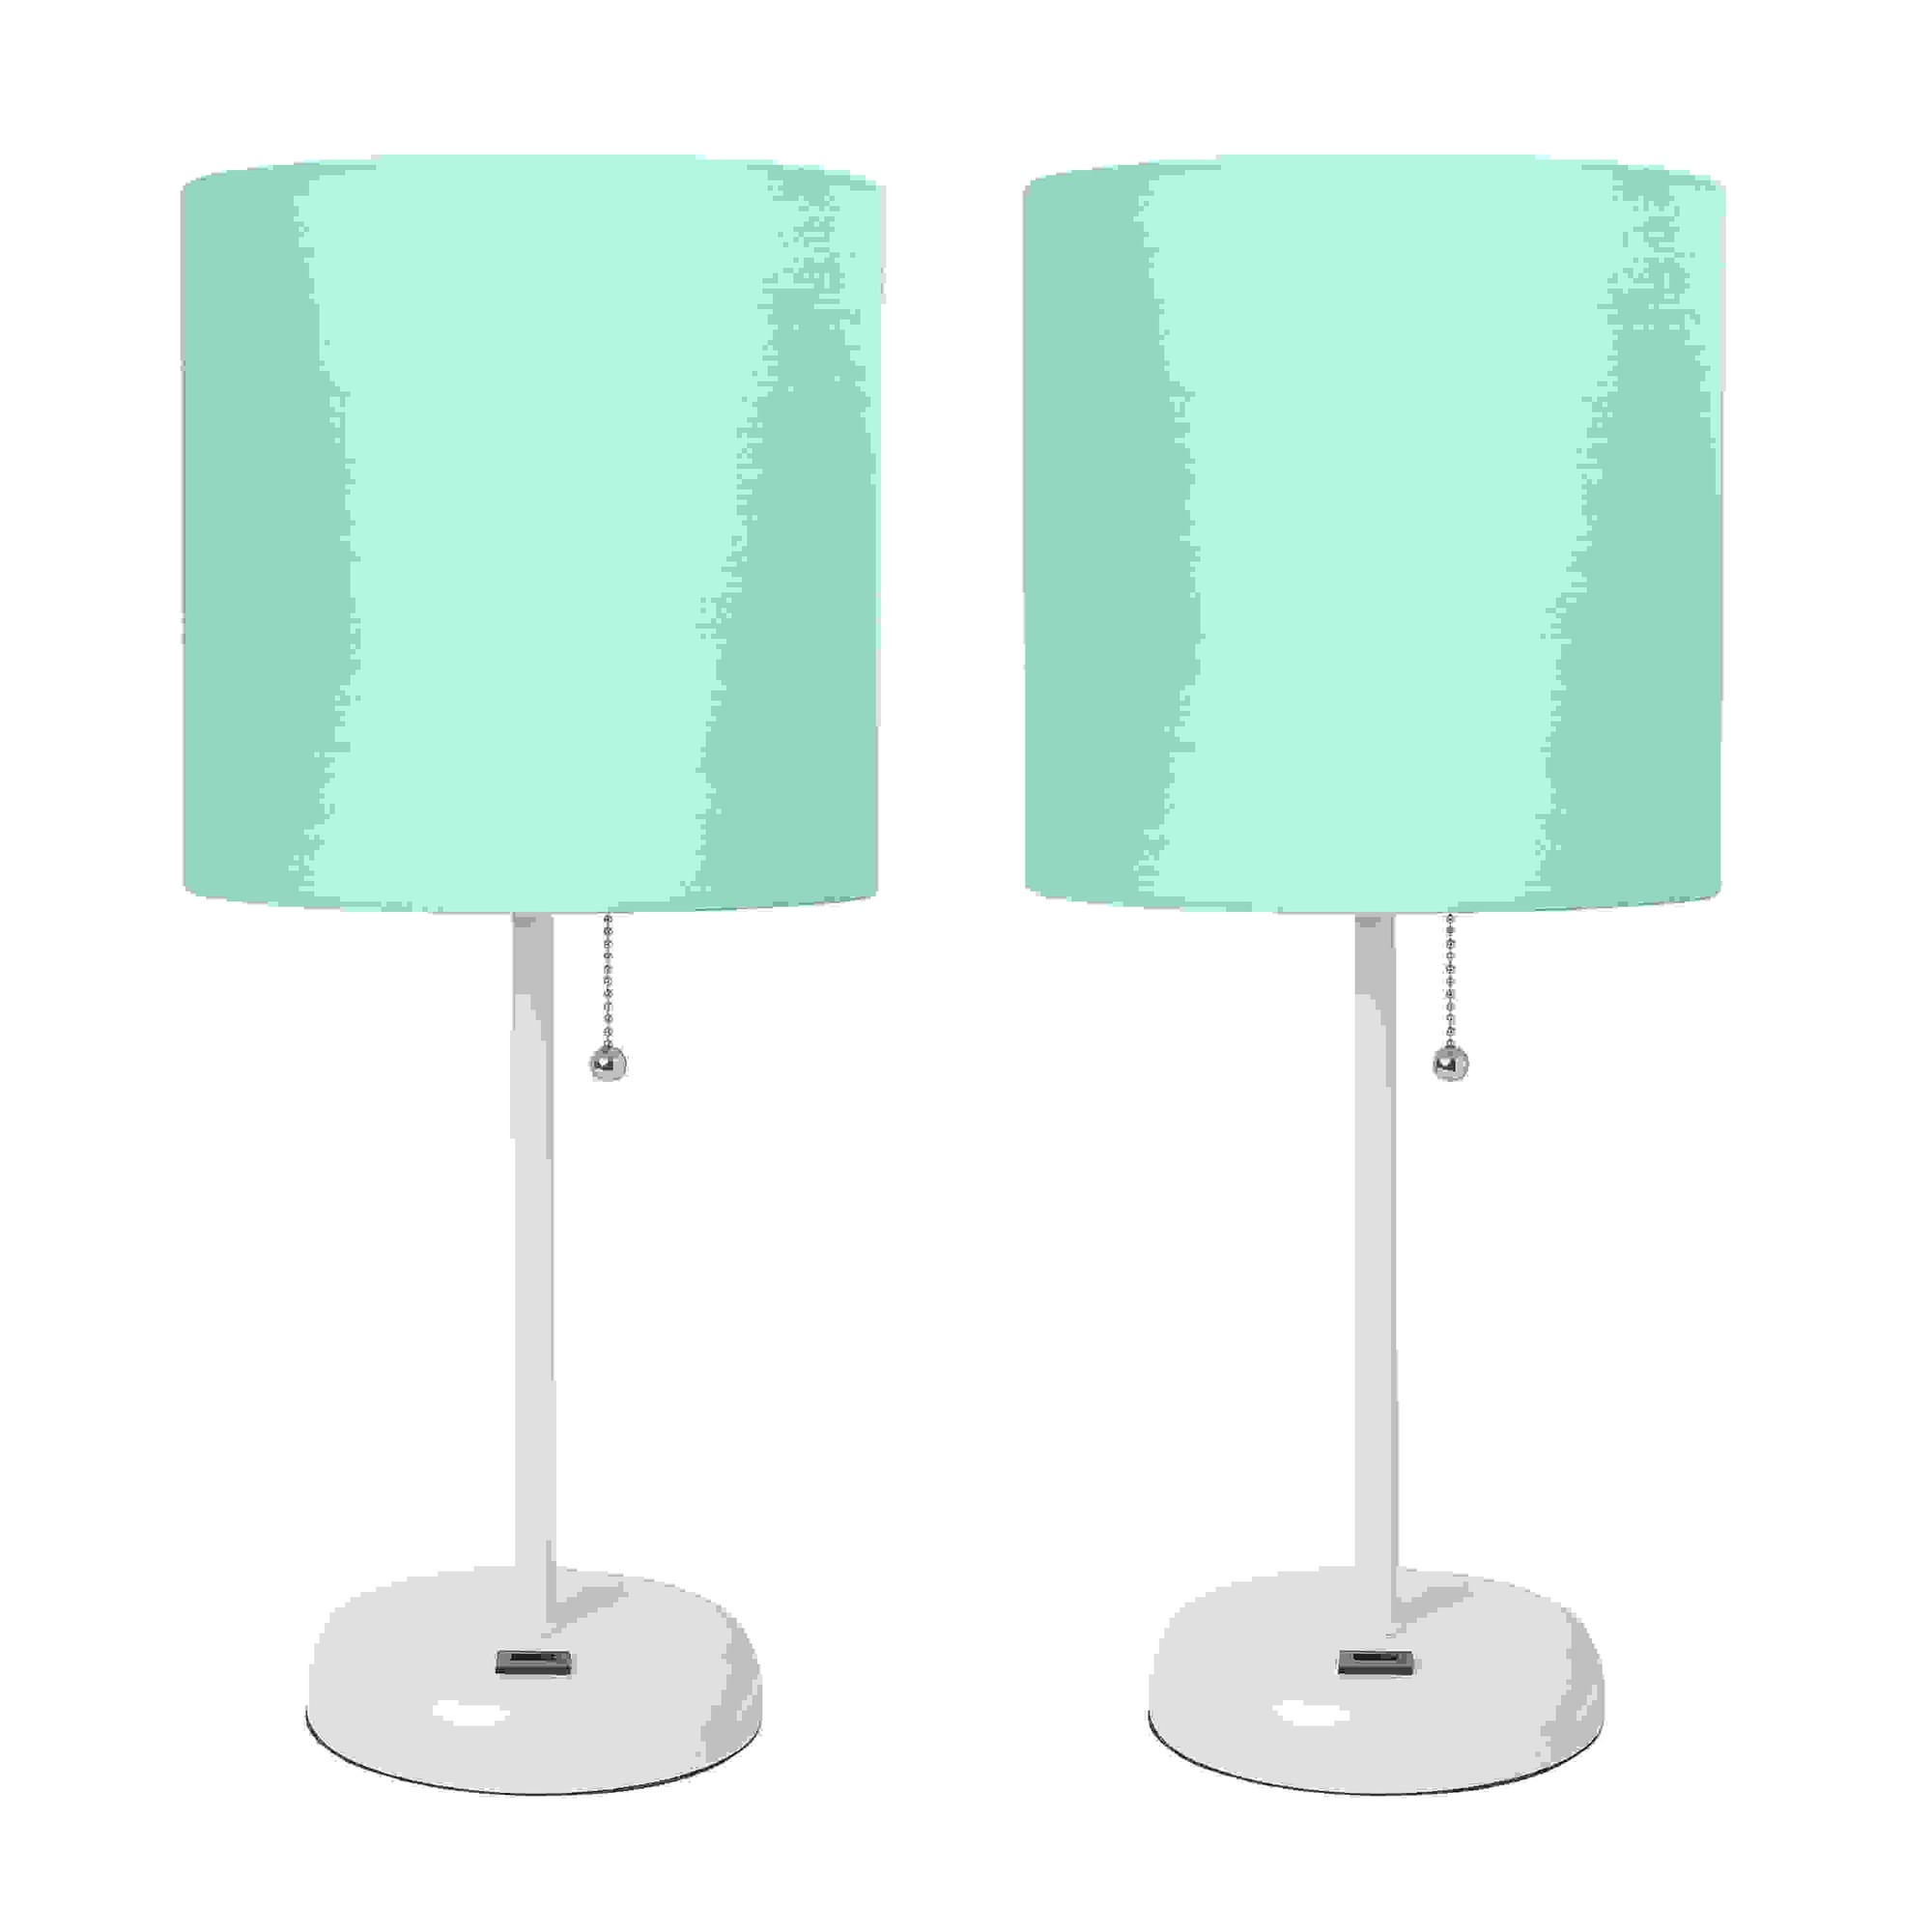 LimeLights White Stick Lamp with USB charging port and Fabric Shade 2 Pack Set, Aqua